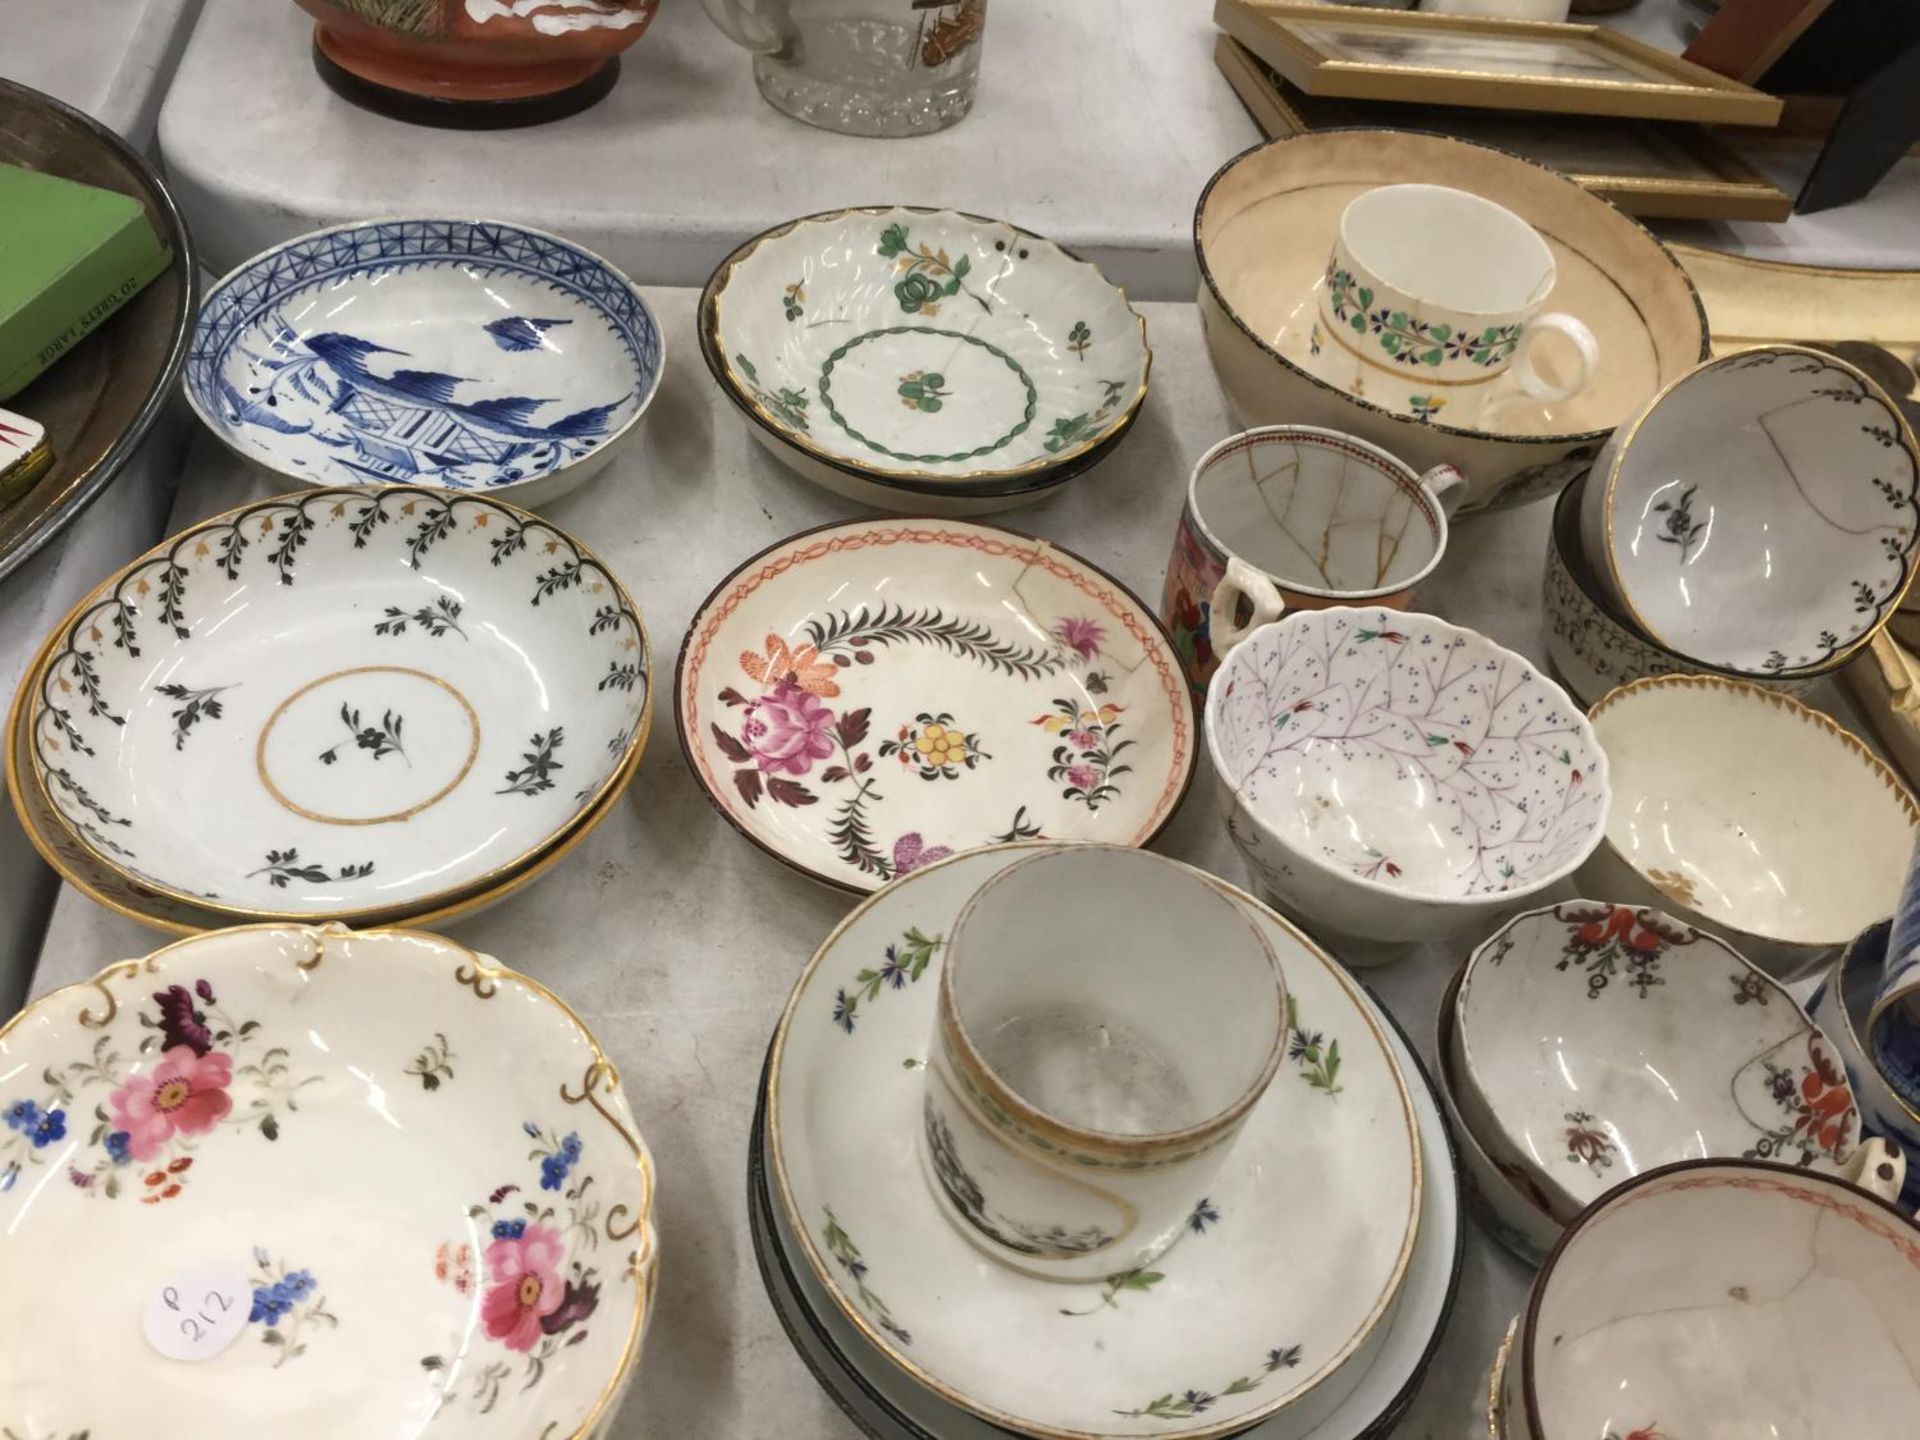 A LARGE QUANTITY OF EARLY 19TH CENTURY TEABOWLS, CUPS AND SAUCERS - SOME A/F - Image 8 of 8